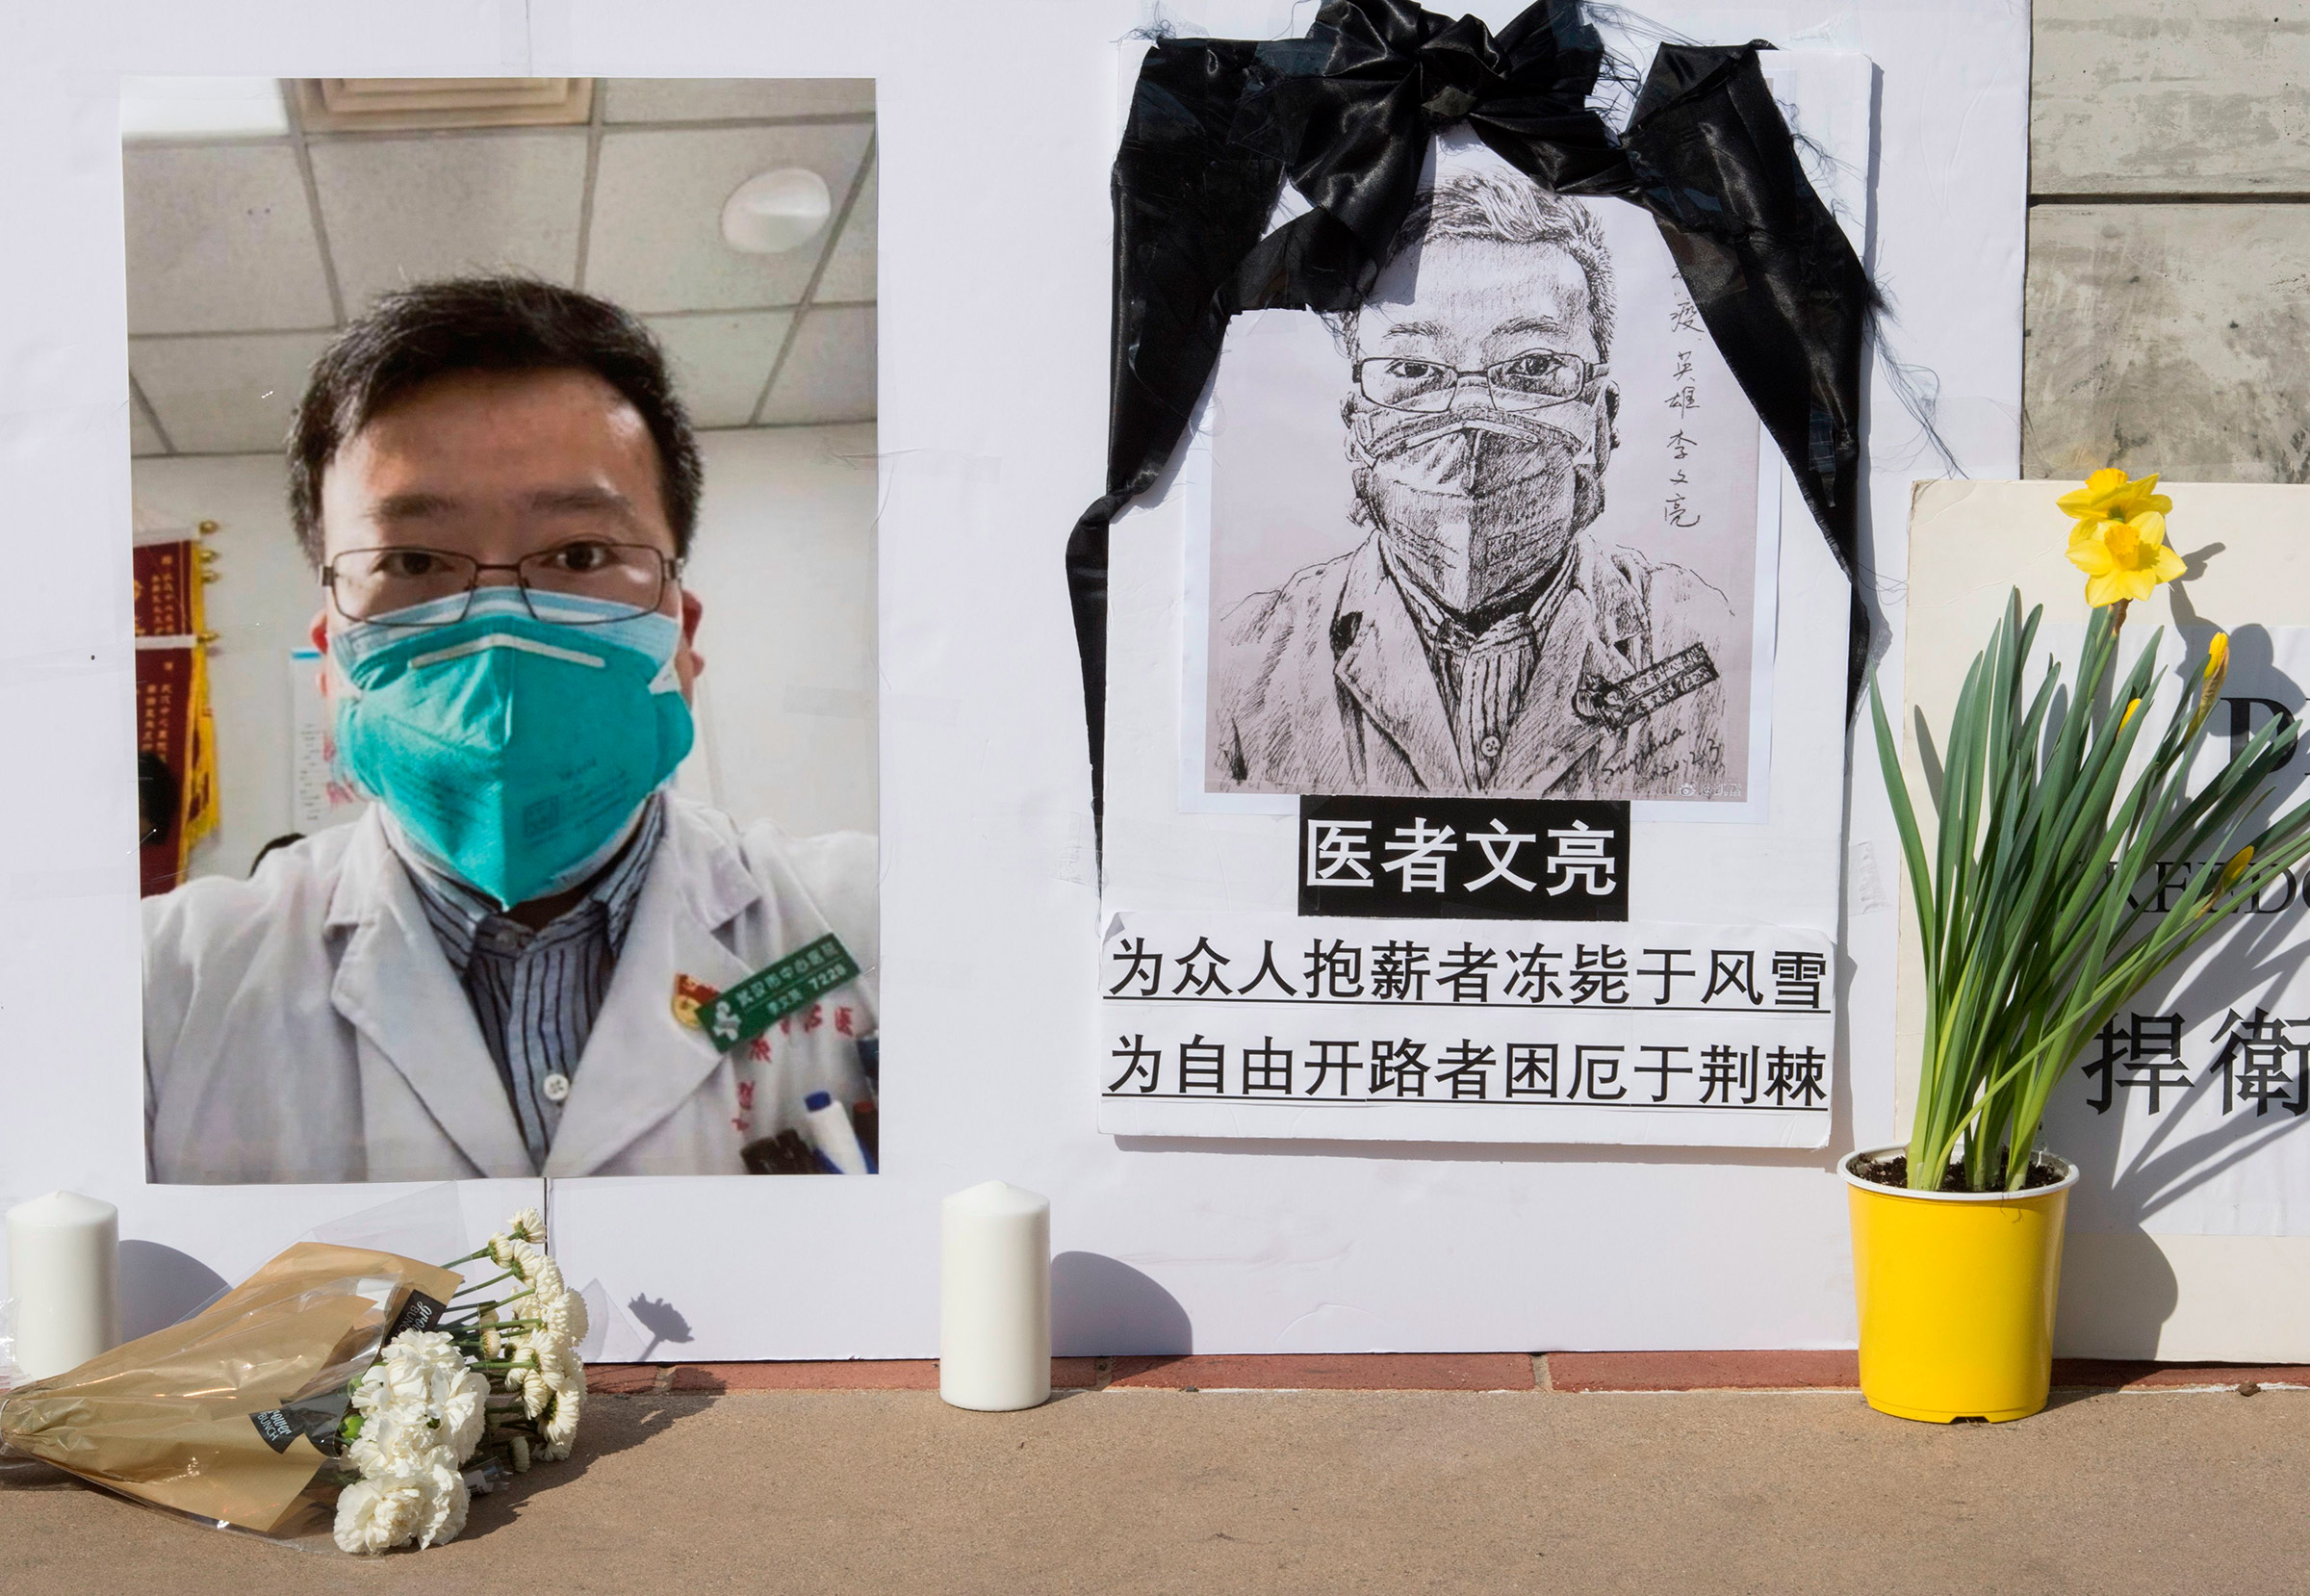 A memorial for Dr Li Wenliang, who was the whistleblower of the Coronavirus, Covid-19, that originated in Wuhan, China and caused the doctors death in that city, is pictured outside the UCLA campus in Westwood, Calif., on Feb. 15, 2020. (Mark Ralston—AFP/Getty Images)